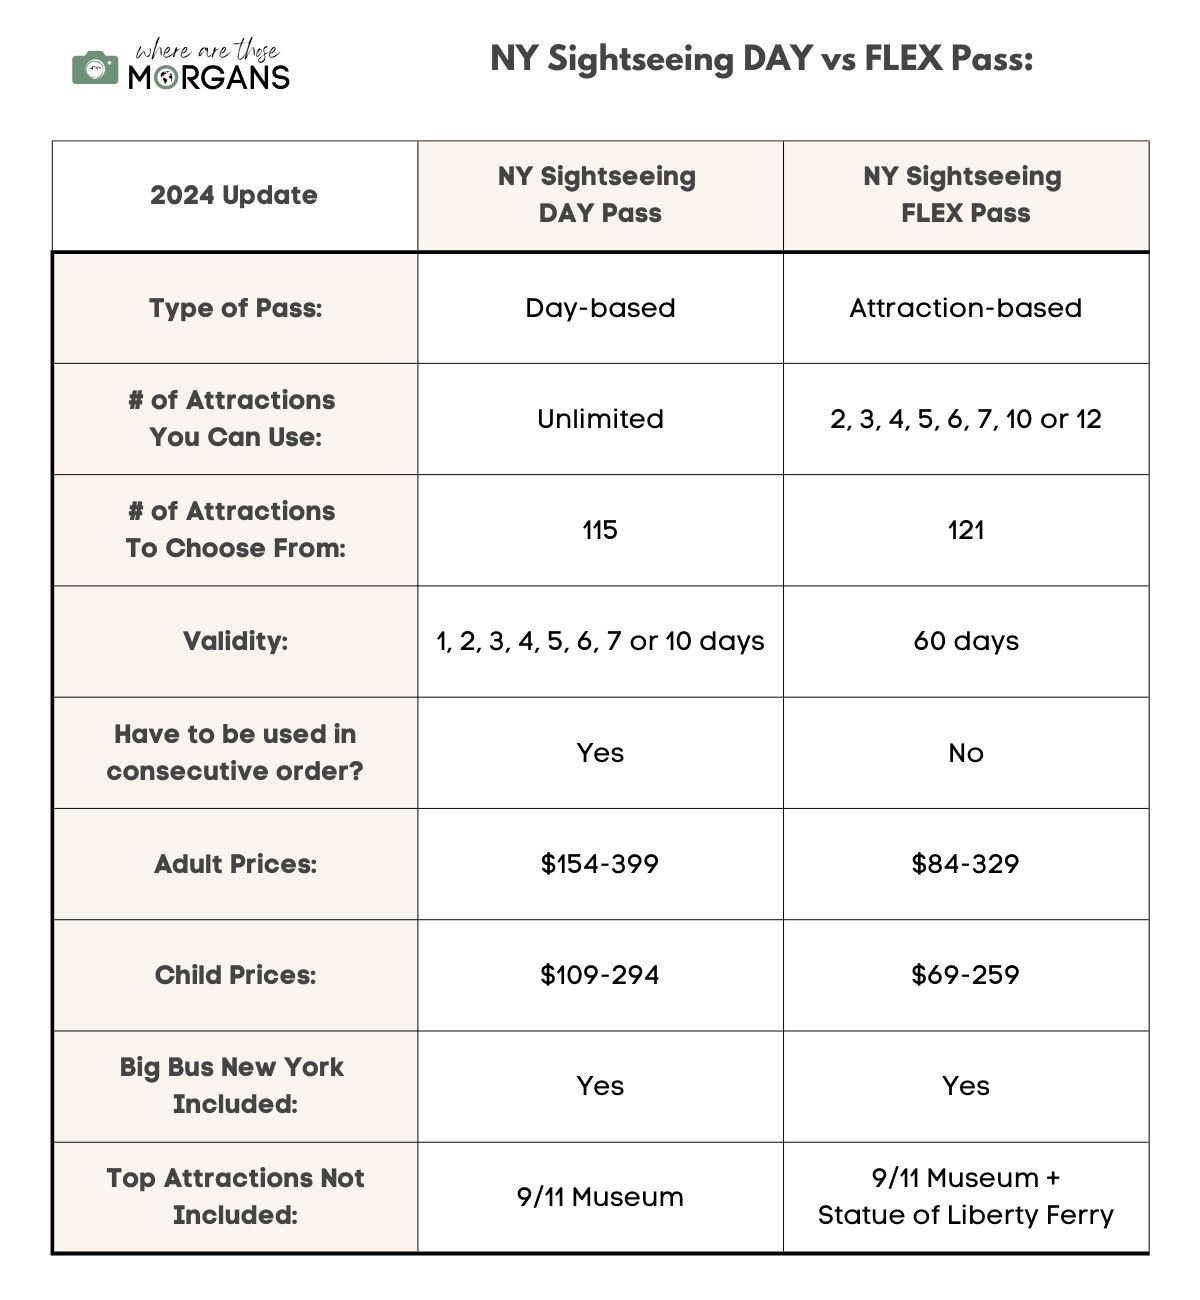 Chart with a high level overview comparing the ny sightseeing pass